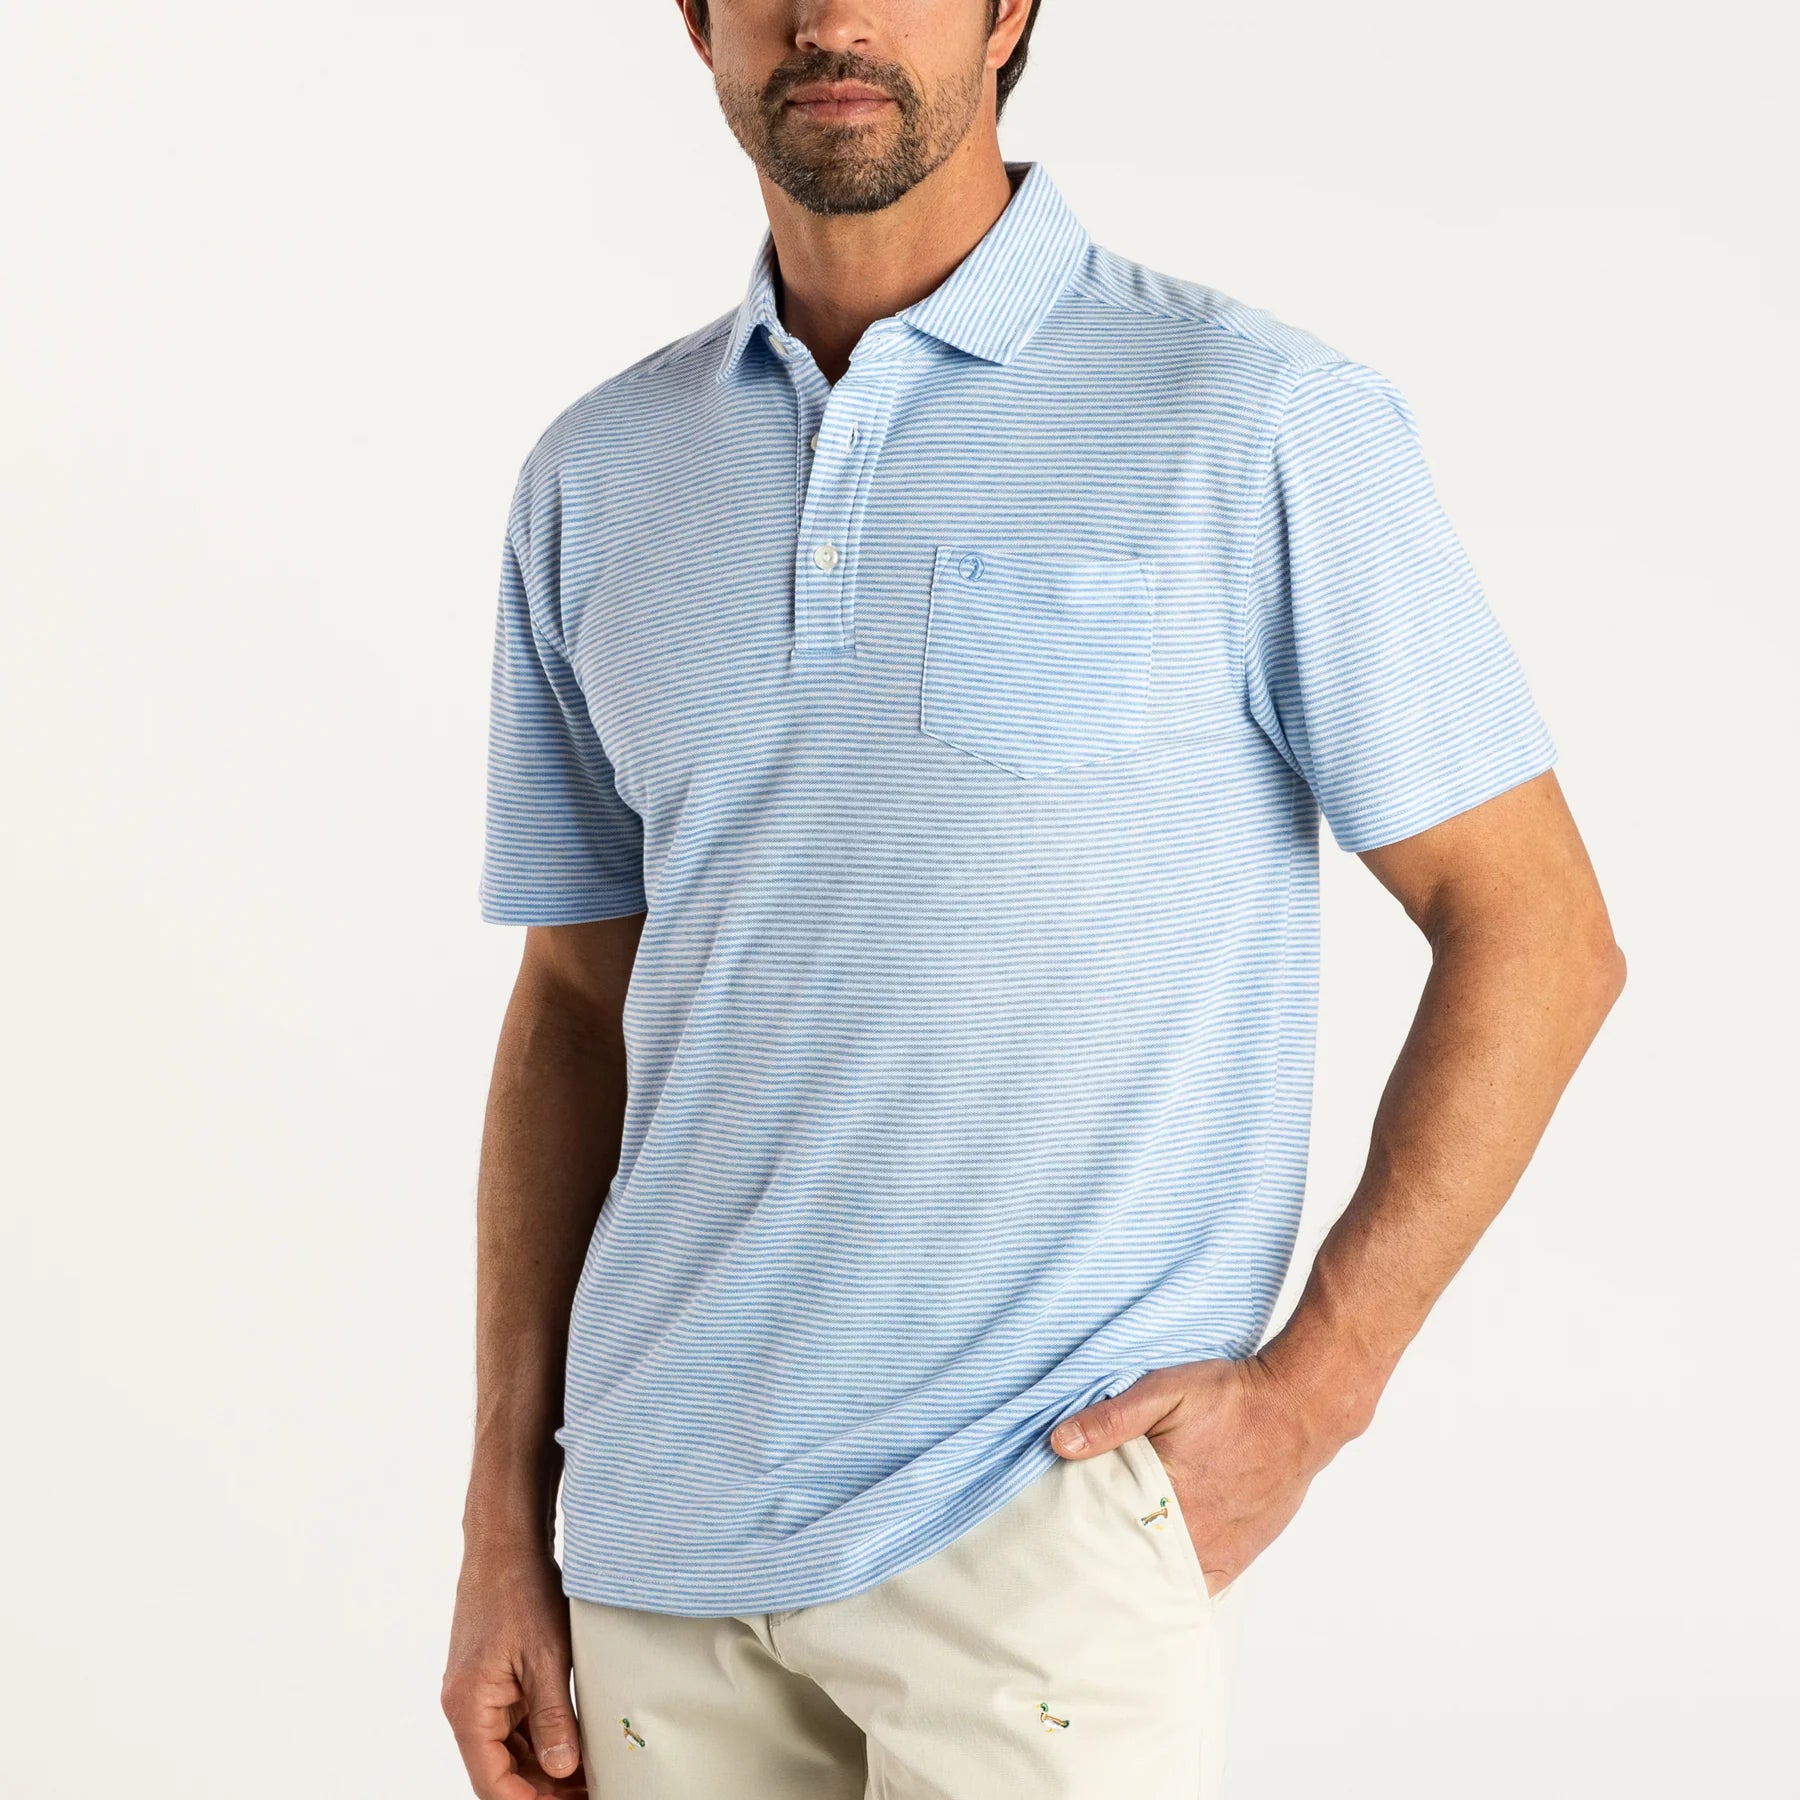 Duck Head Summerford Stripe Performance Polo - Imperial Blue Heather